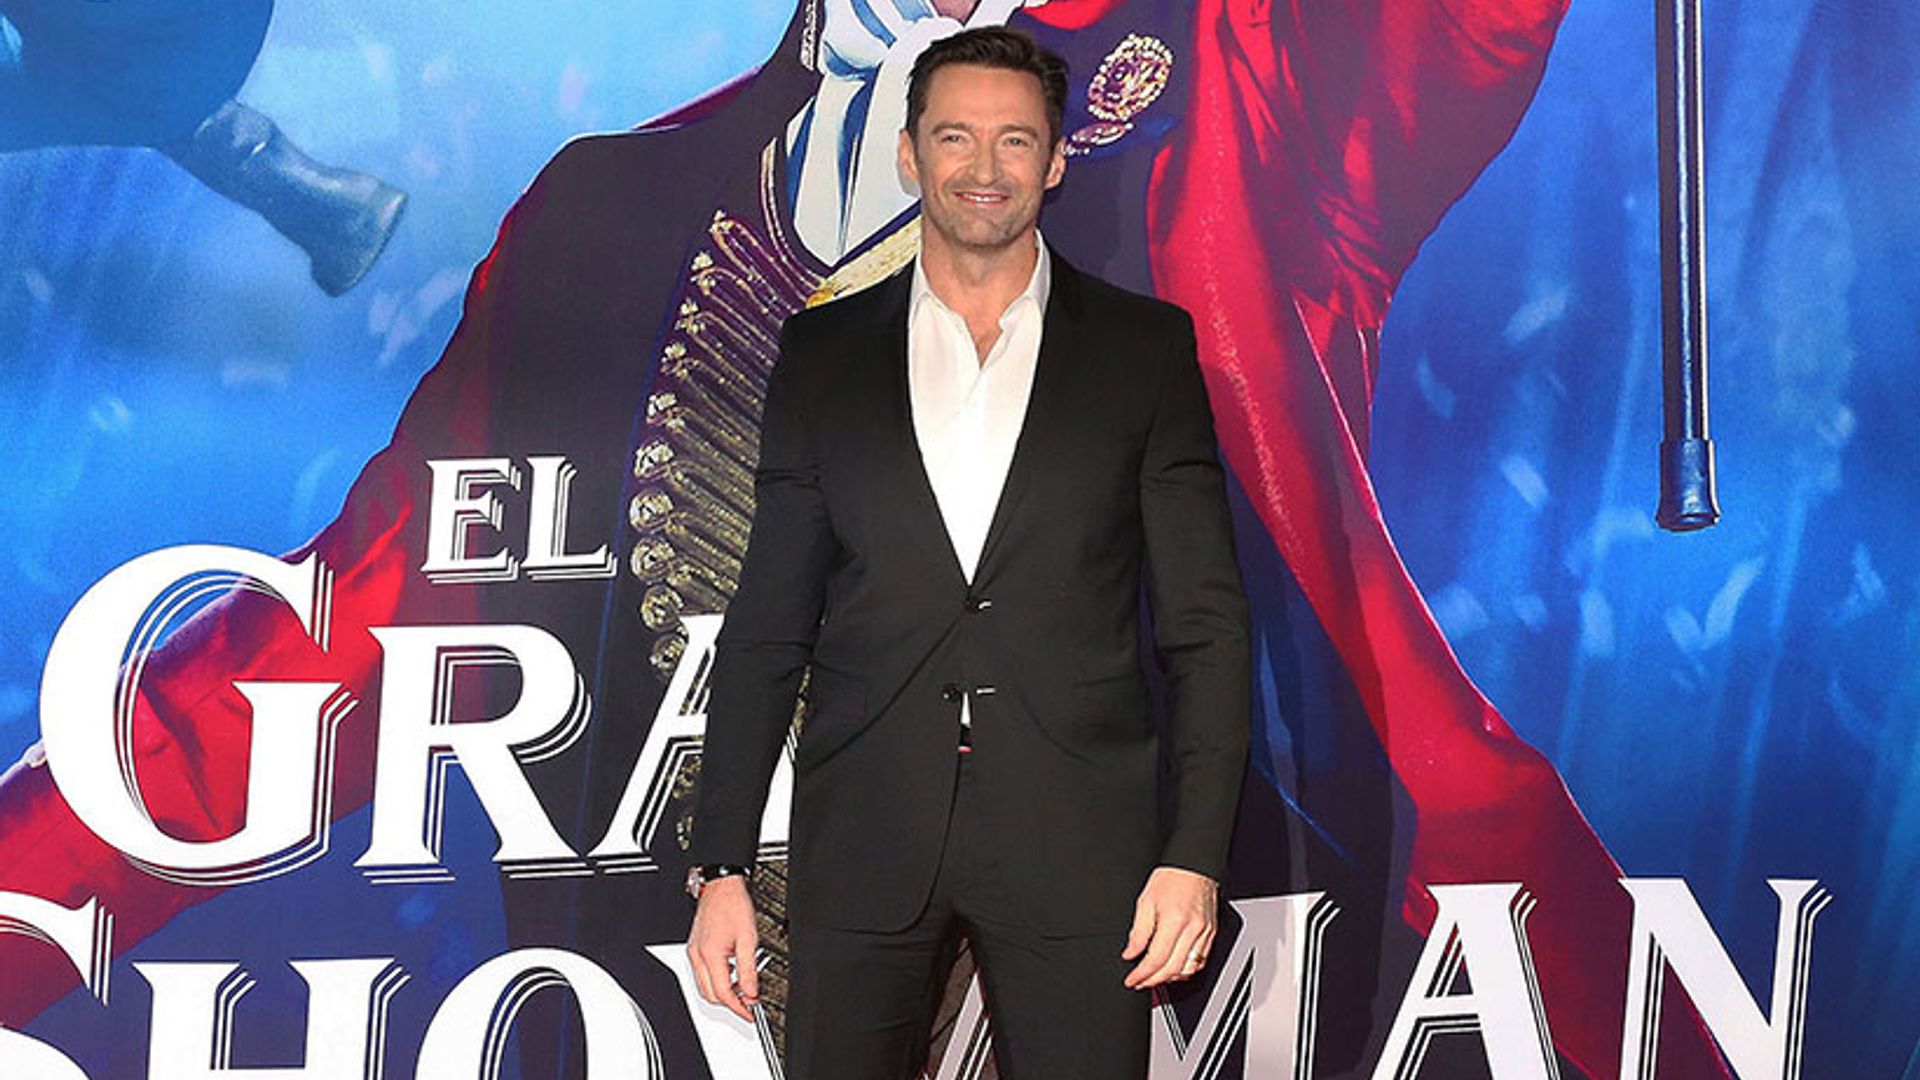 The Greatest Showman fans can now see Hugh Jackman perform live songs - full details